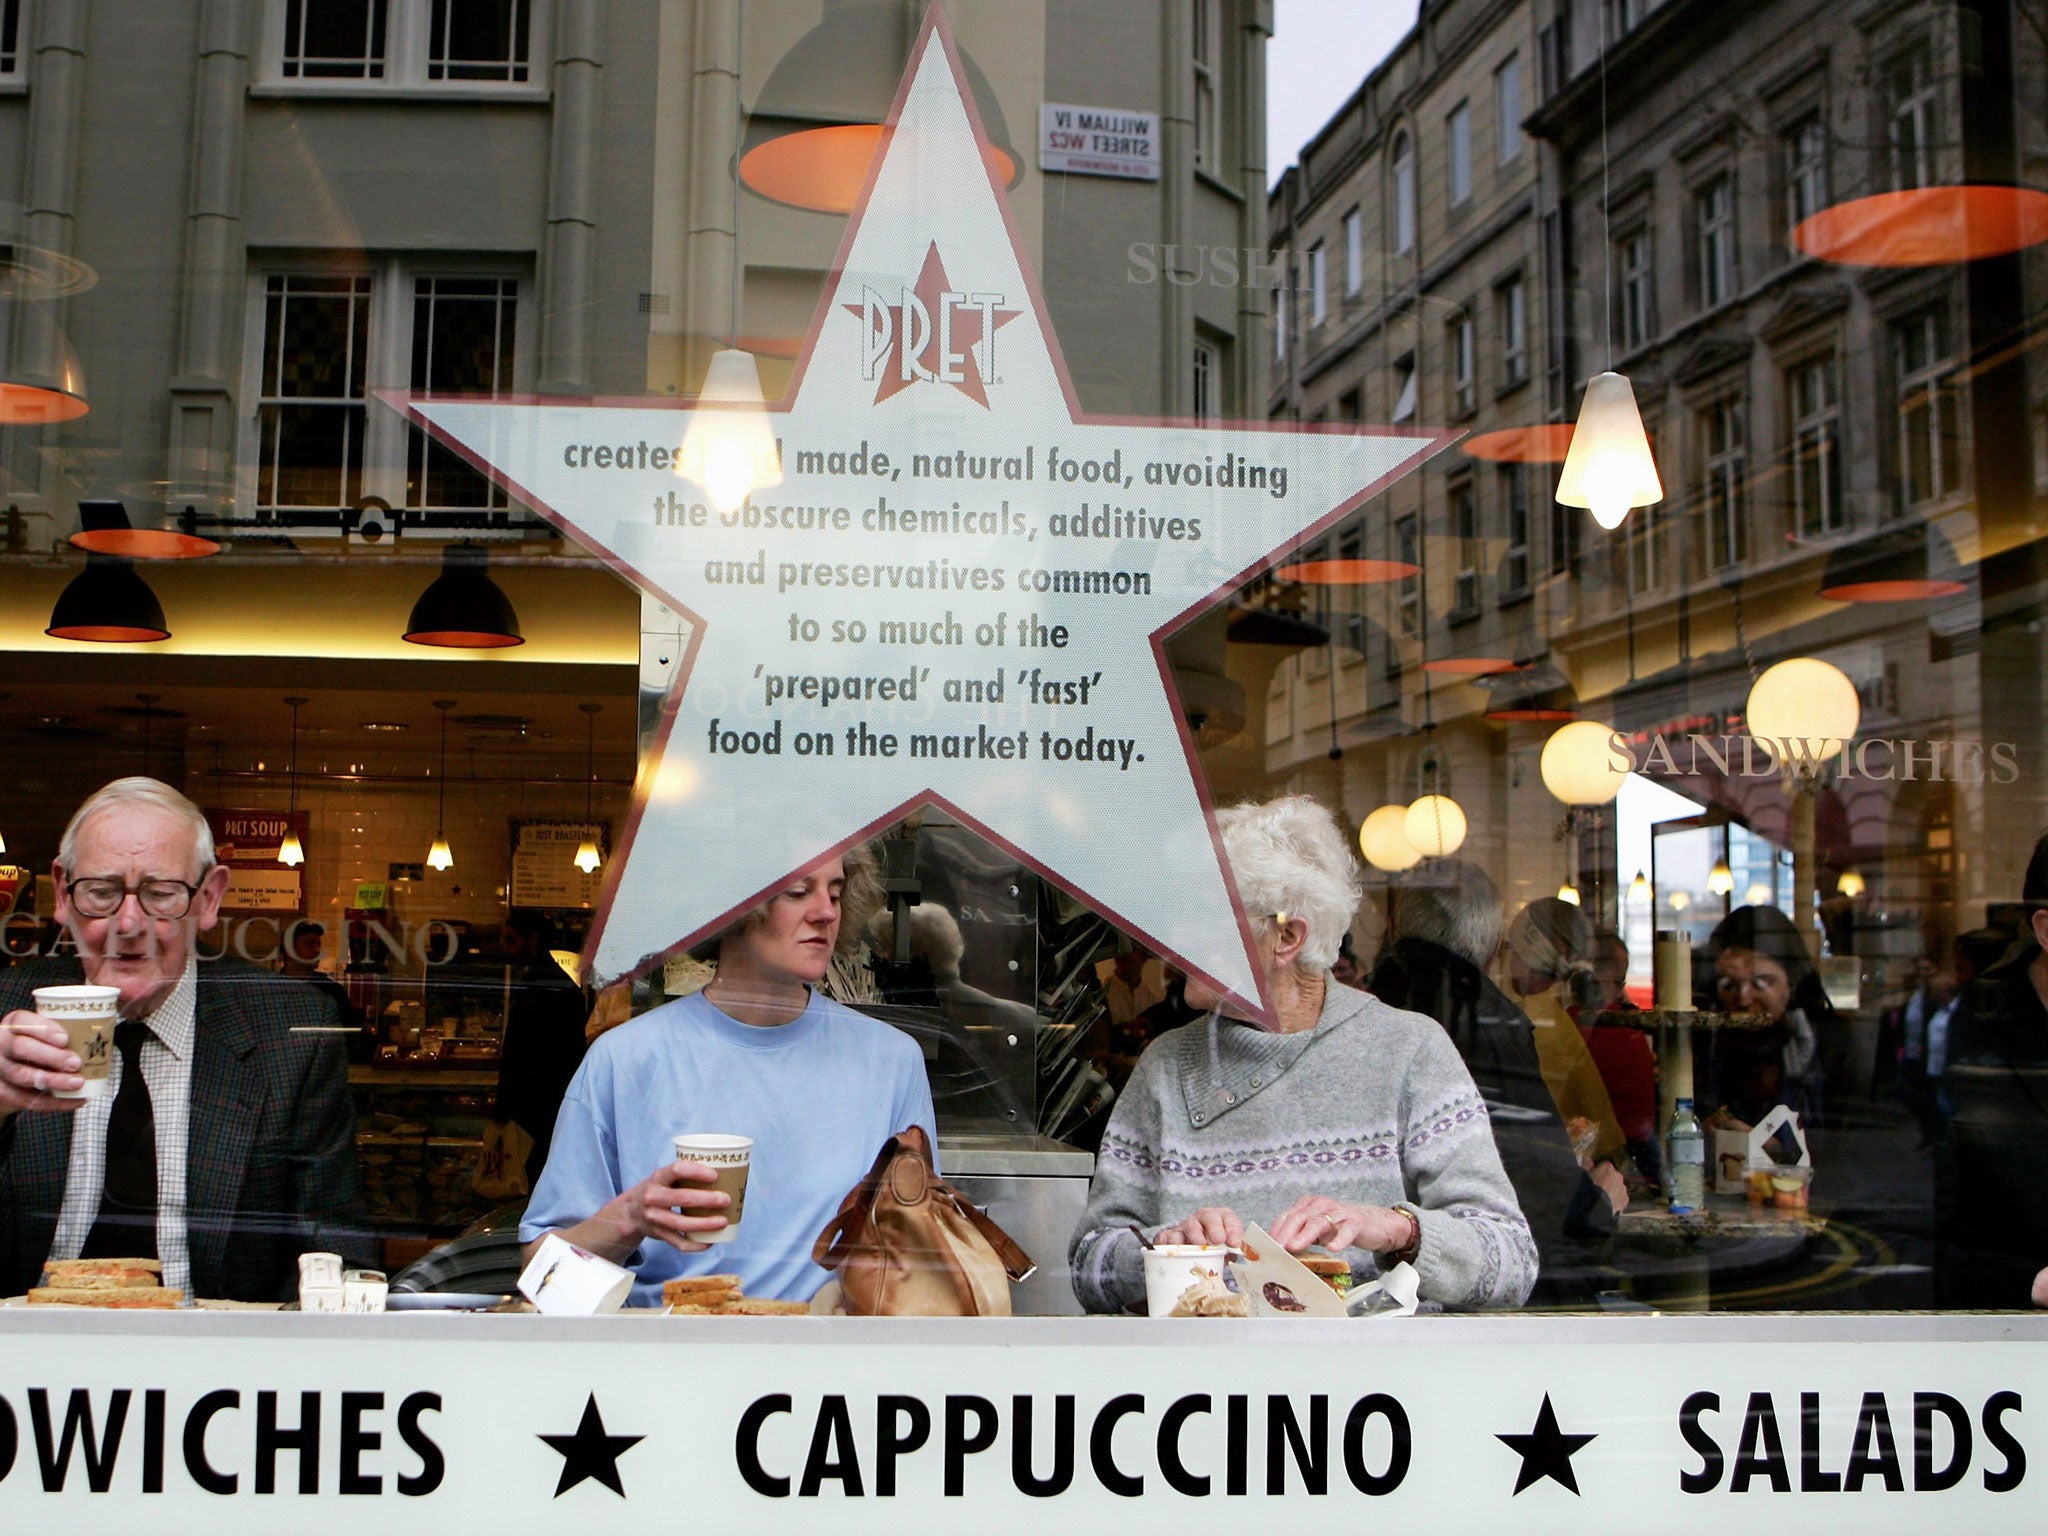 People drink coffee at a Pret A Manger store in central London on April 25, 2006 in London, England.